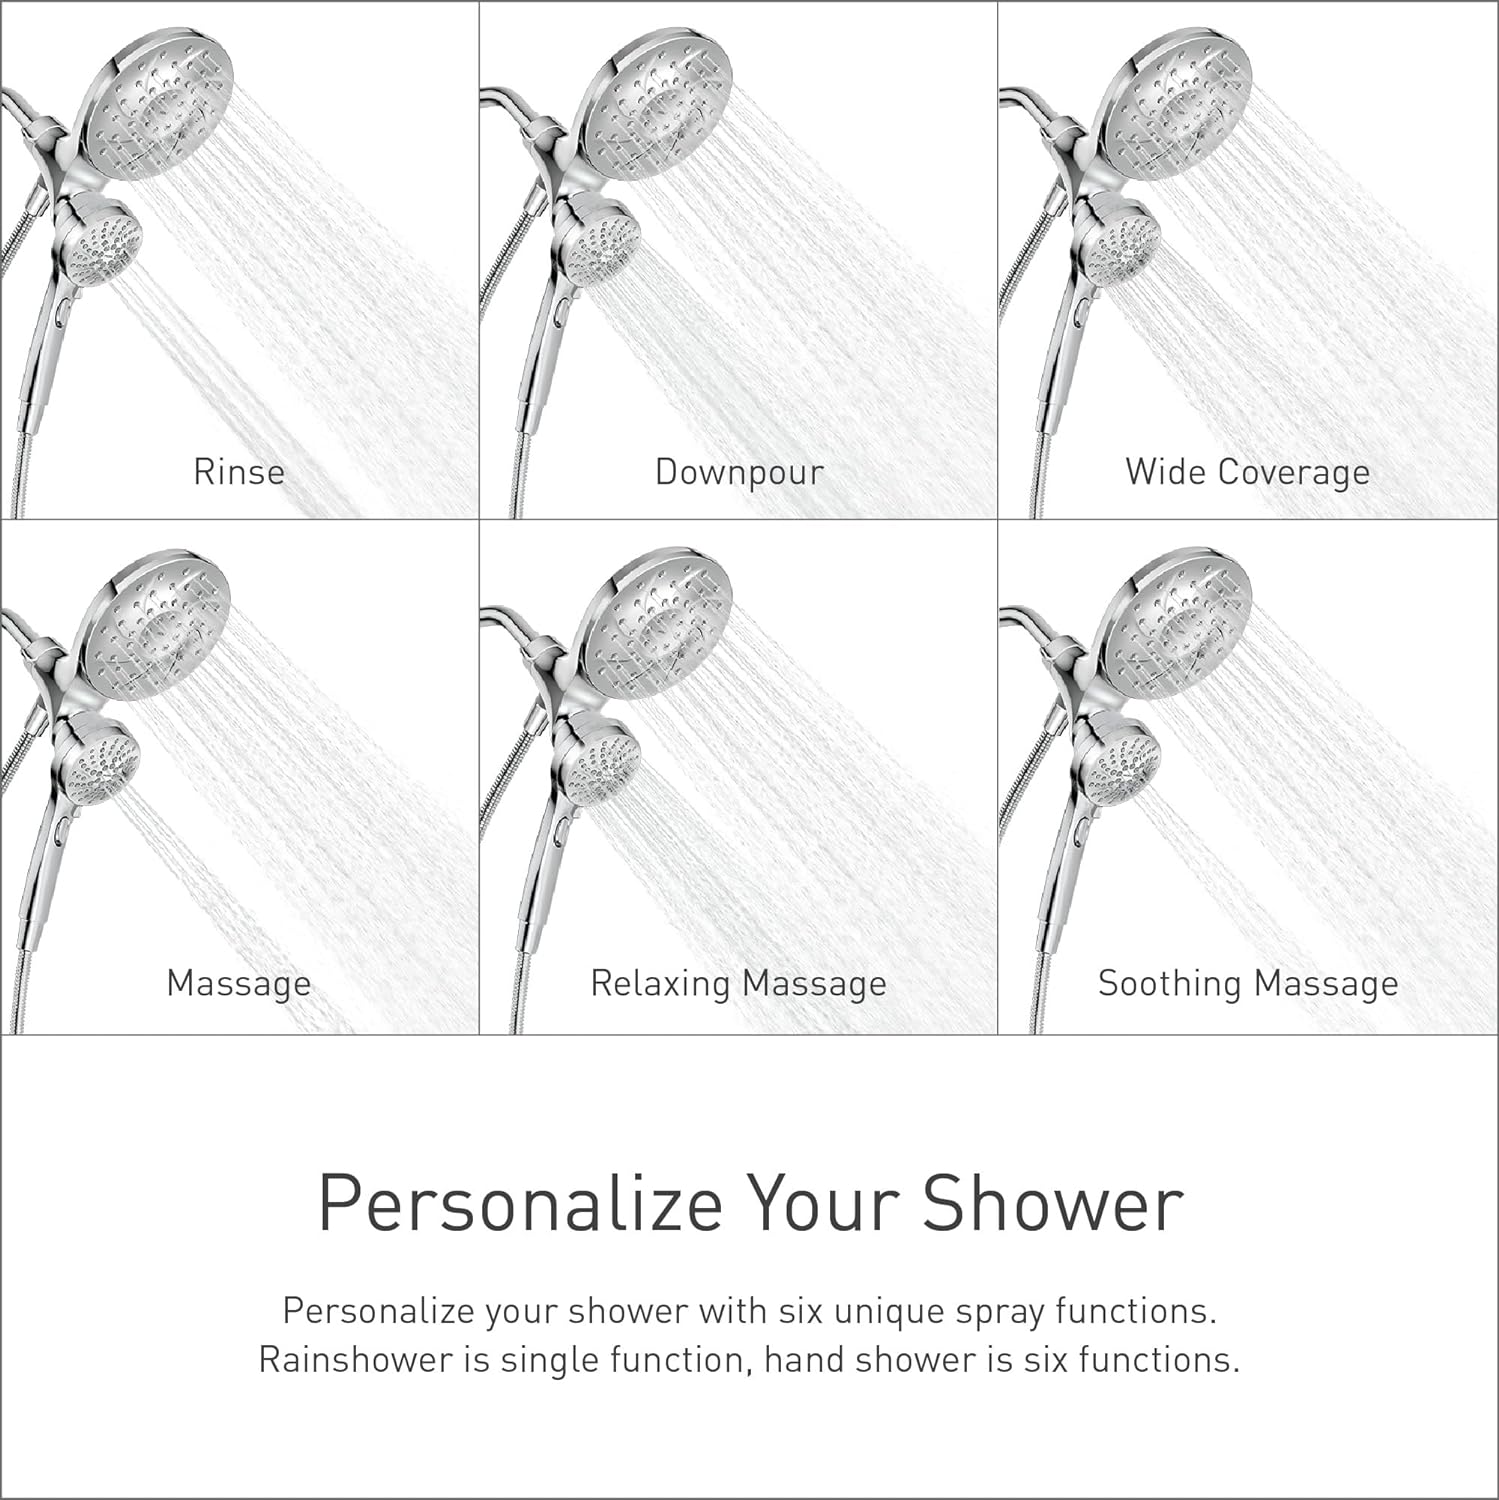 Moen Engage Magnetix Chrome 2.5 GPM Handheld/Rain Shower Head 2-in-1 Combo Featuring Magnetic Docking System, Rain Shower Head with Removable Handheld Spray, 26009